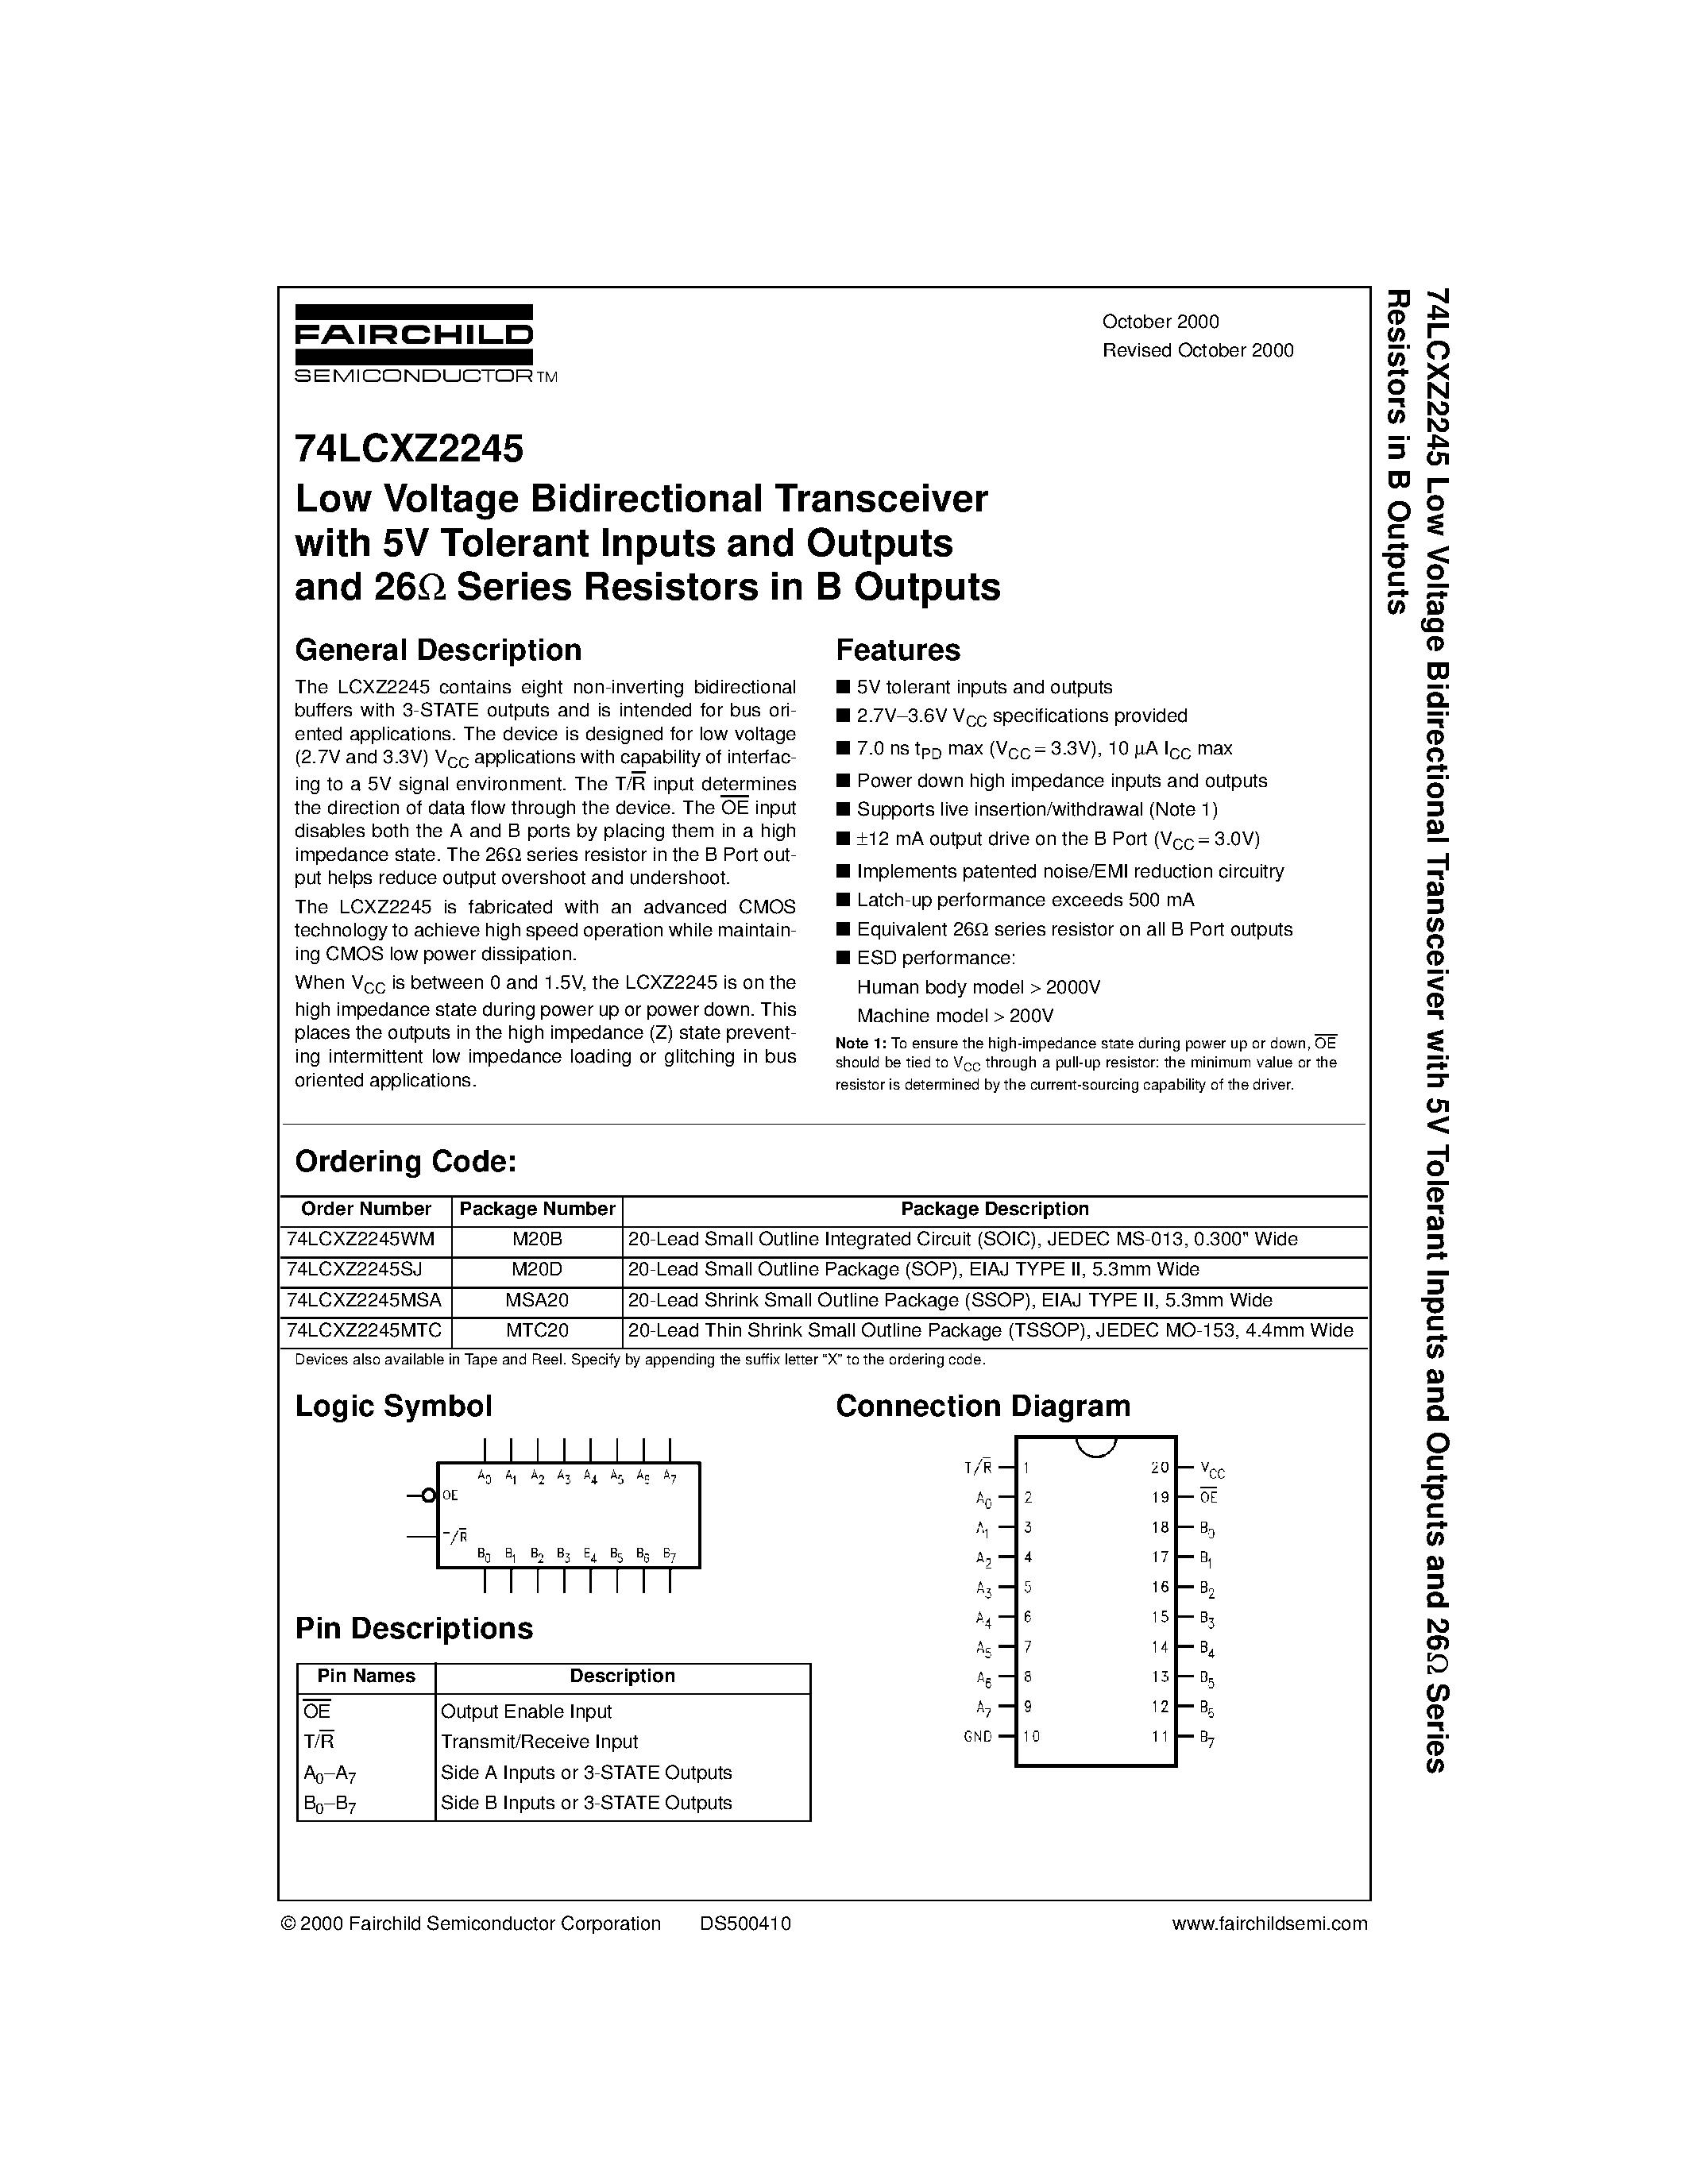 Datasheet 74LCXZ2245 - Low Voltage Bidirectional Transceiver with 5V Tolerant Inputs and Outputs and 26 Series Resistors in B Outputs page 1